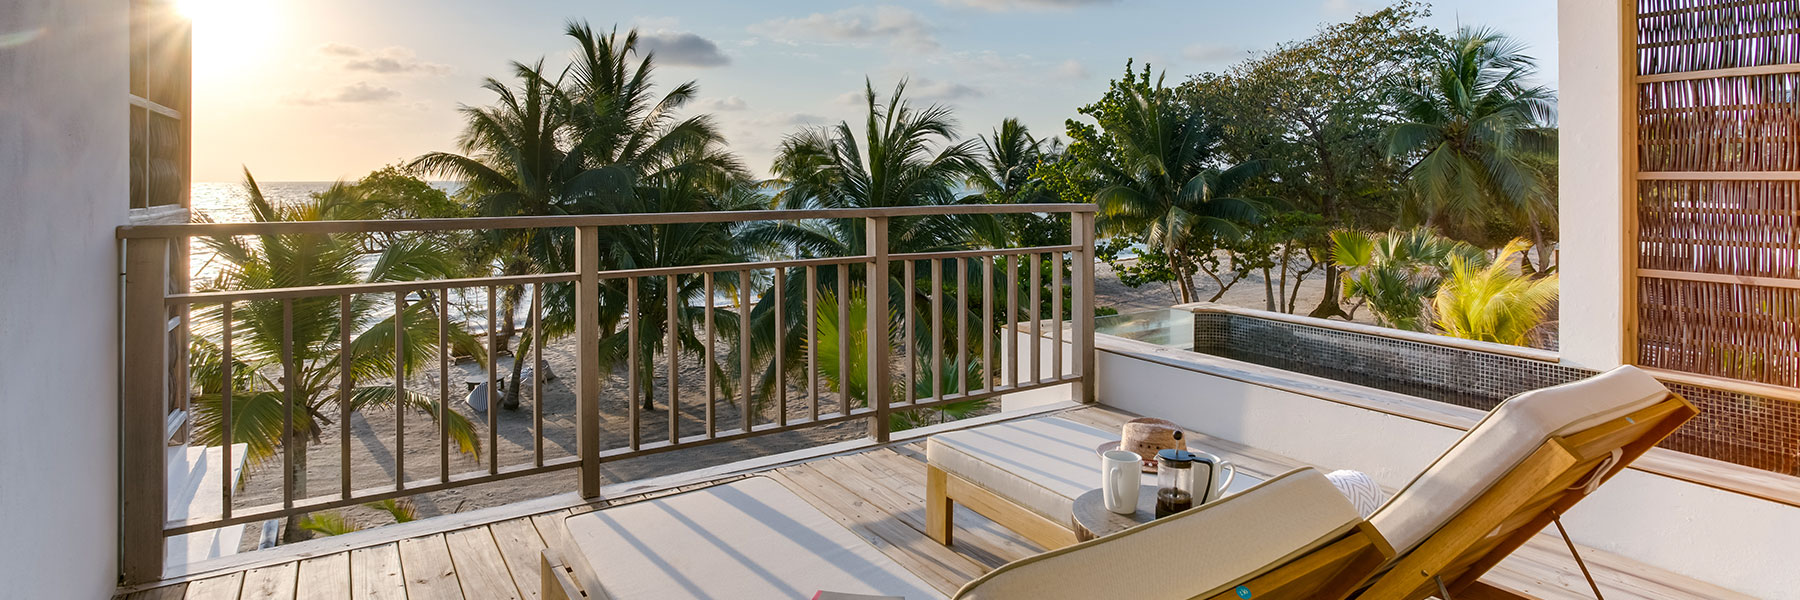 Rooms of Itz’ana Resort and Residences Placencia Stann Creek